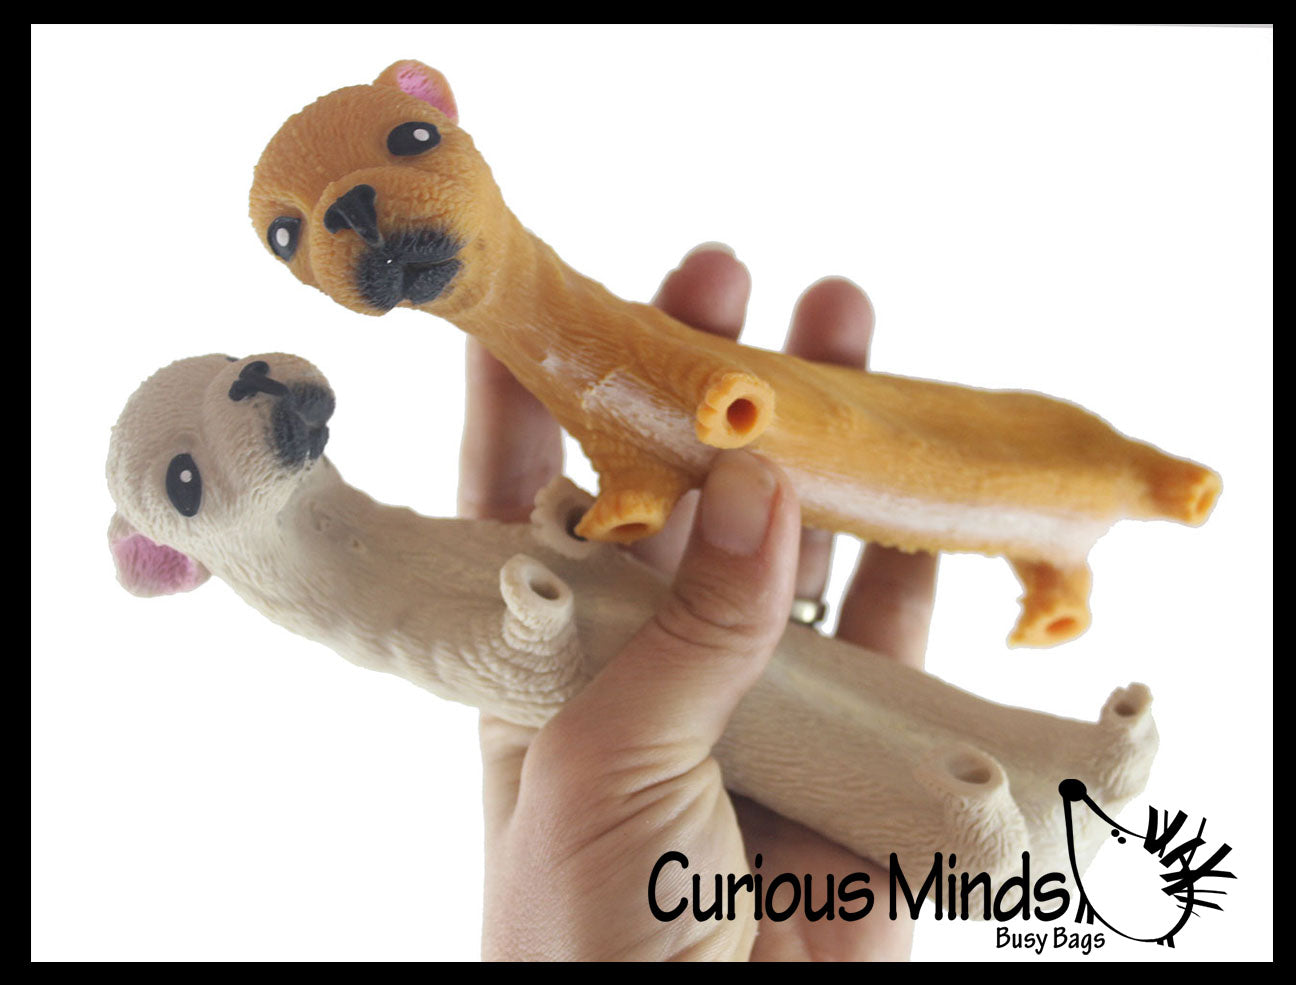 Curious Minds Busy Bags 2 Stretchy Weiner Dog Crushed Bead Sand Filled - Doggy Lover Sensory Fidget Toy Weighted (Random Colors)